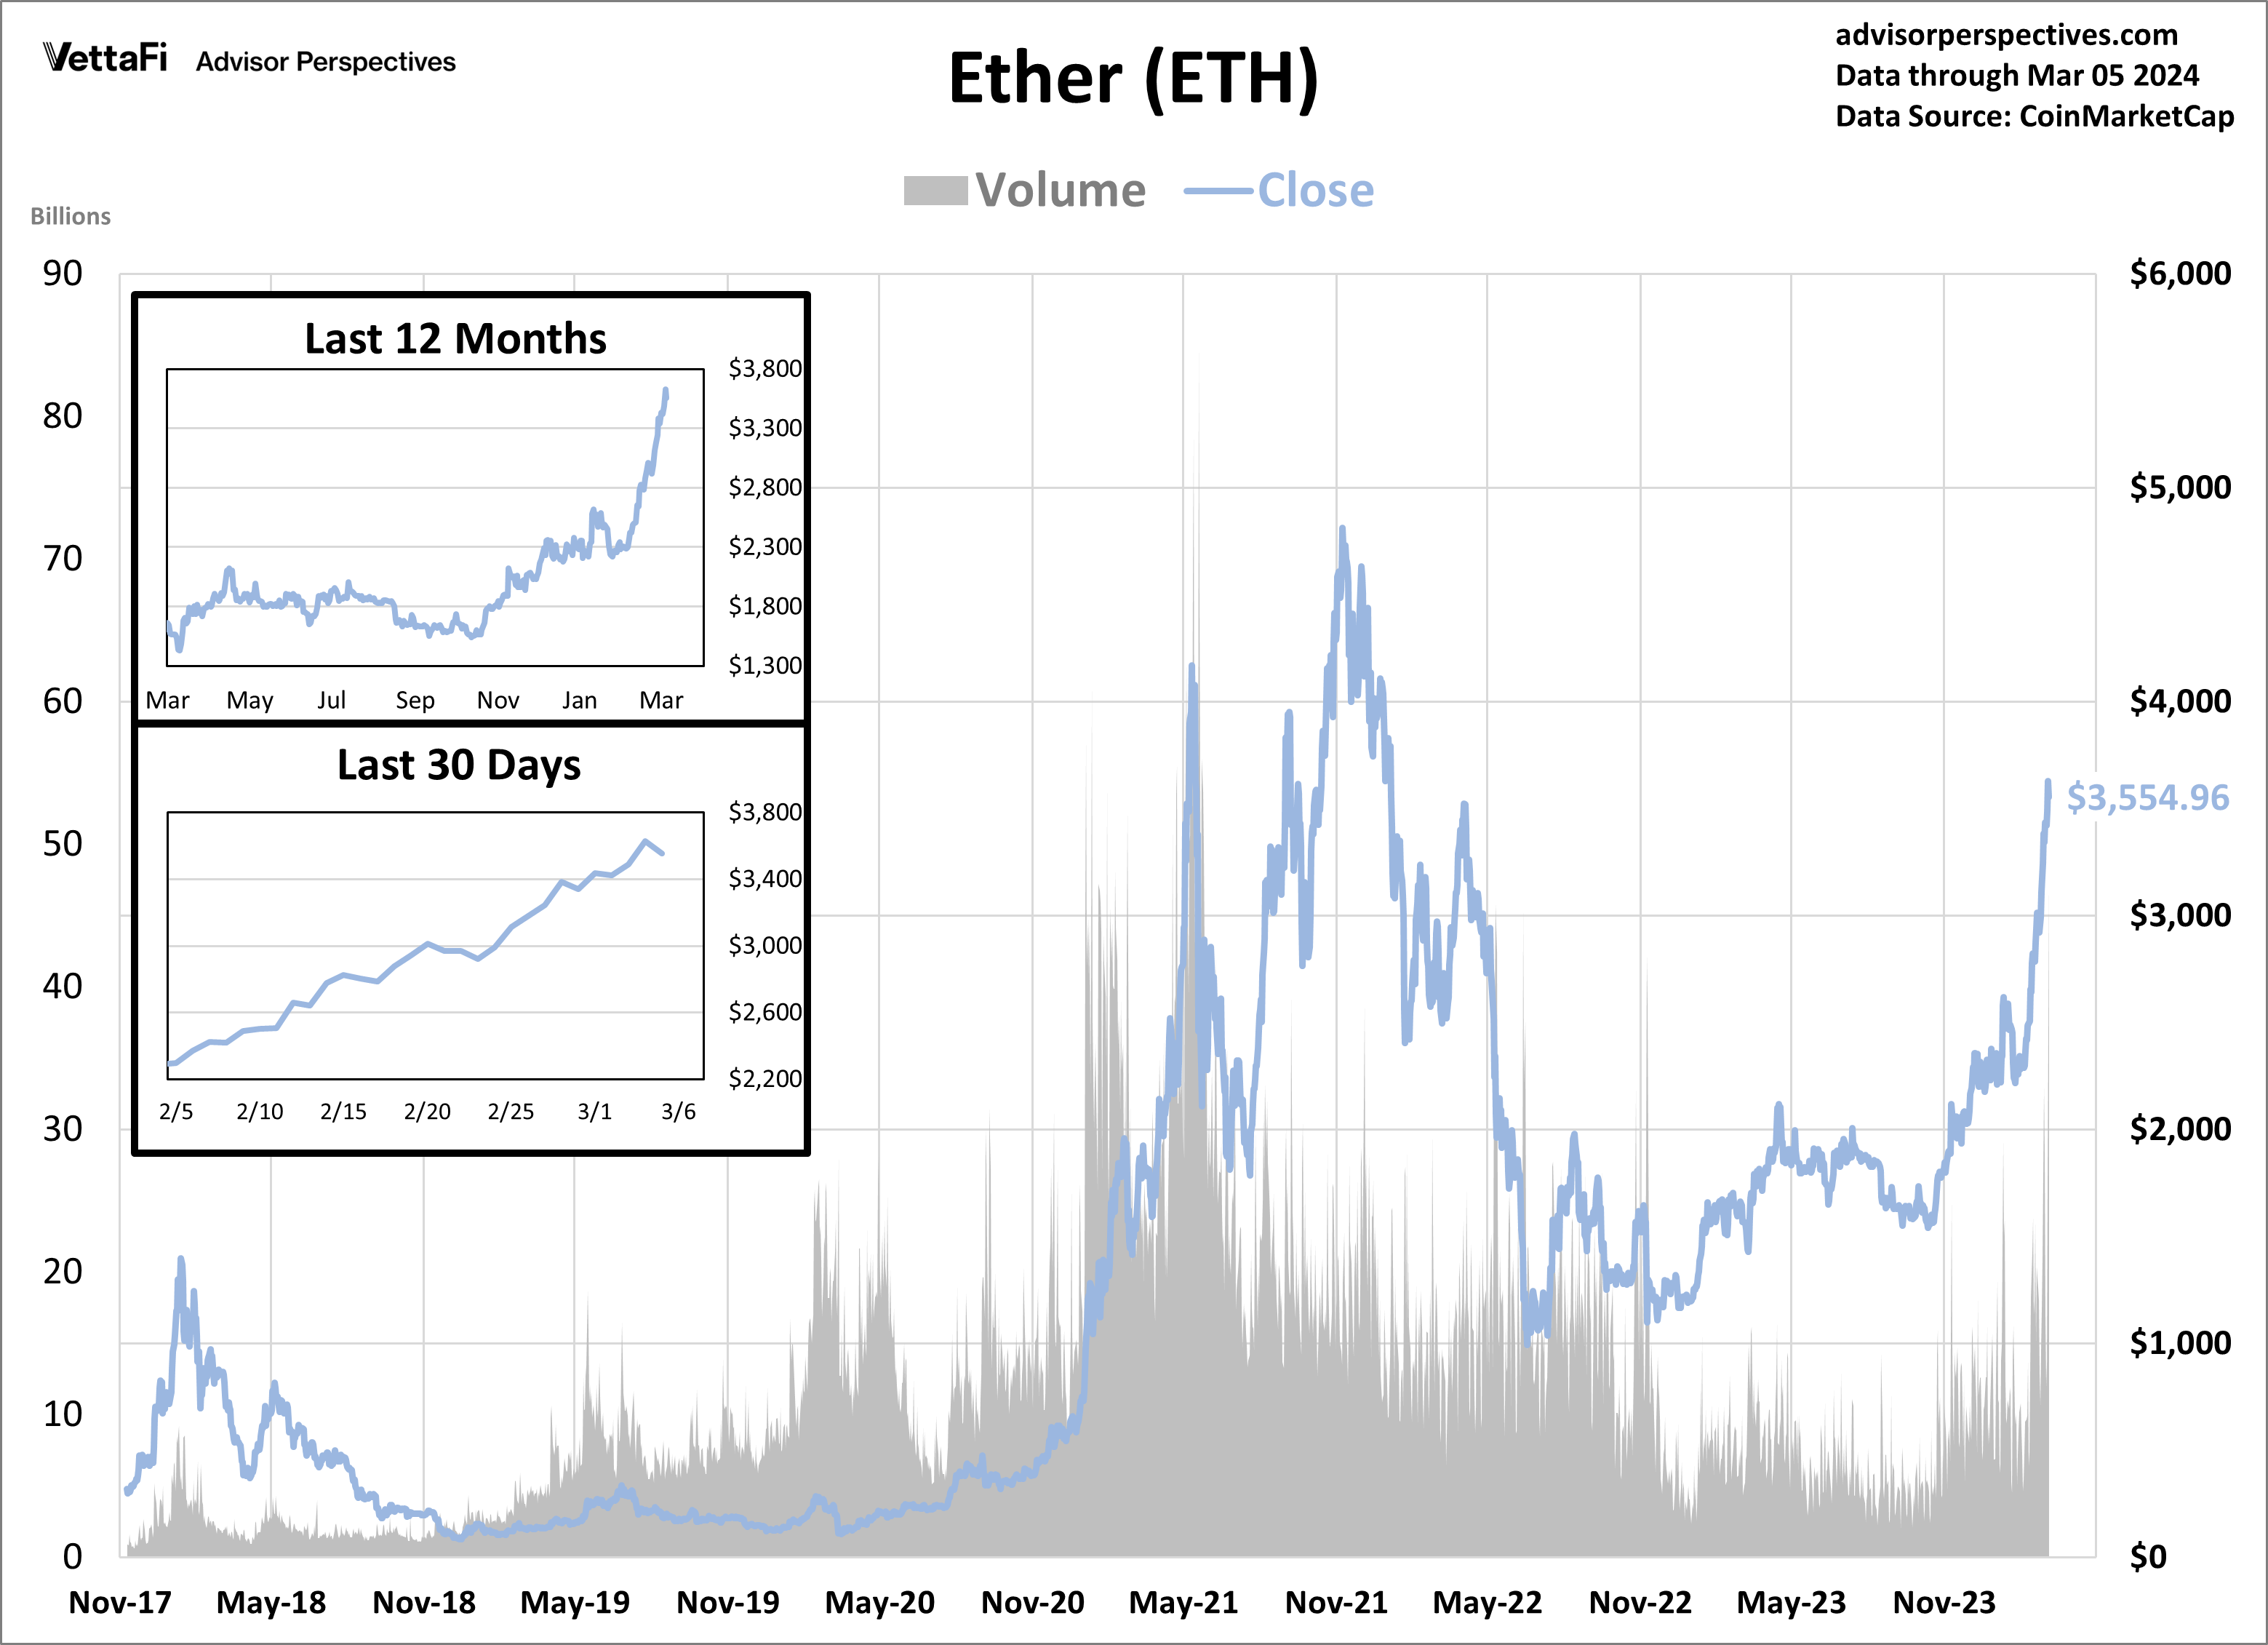 Ether Volume and Close